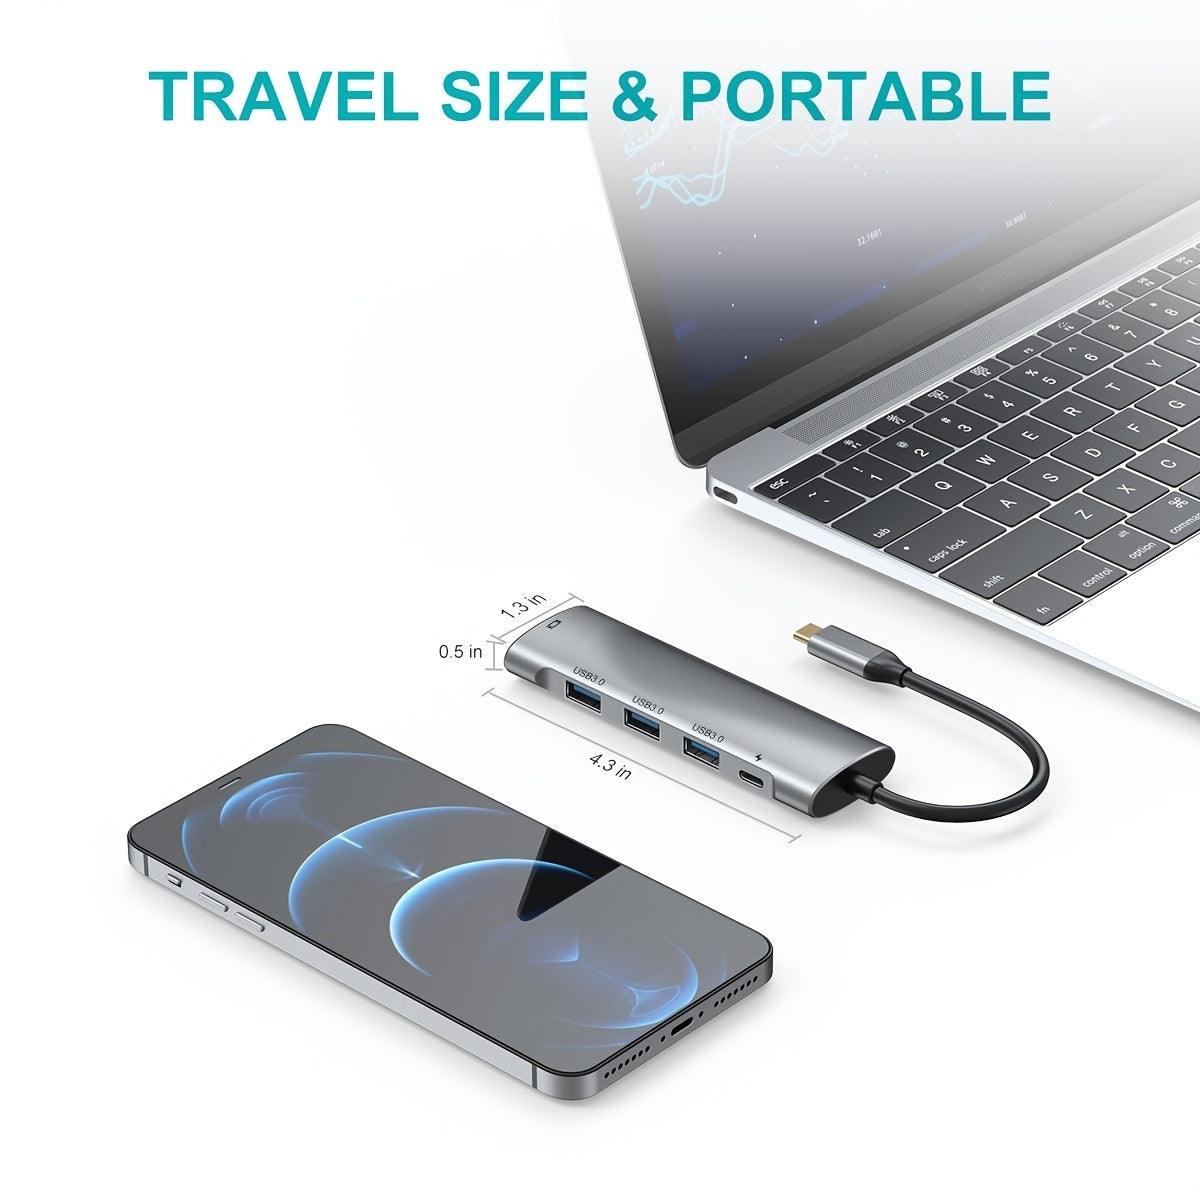 LazyBank S5 USB C Hub; USB C Hub Multiport Adapter 5 In 1 USB C Dongle With 4K HDMI Output; 3*USB 3.0 Ports; 1*PD Port; Compatible With Steam Deck And The Most Type C Devices - Lazy Pro